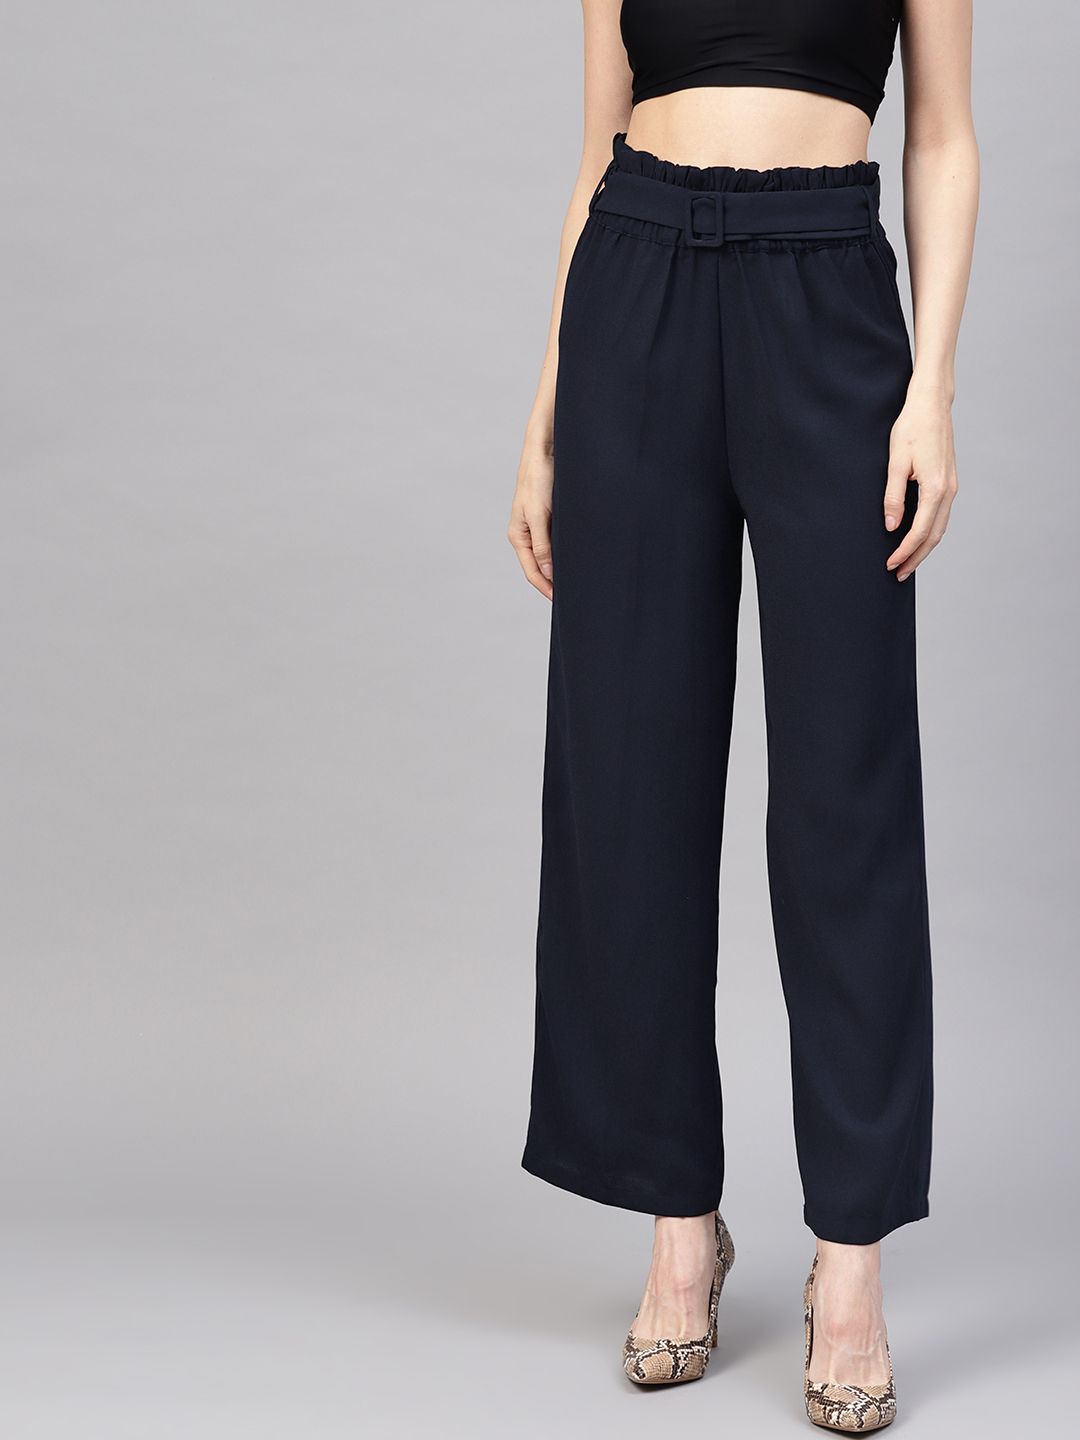 SASSAFRAS Women Navy Blue Regular Fit Solid Parallel Trousers Price in India